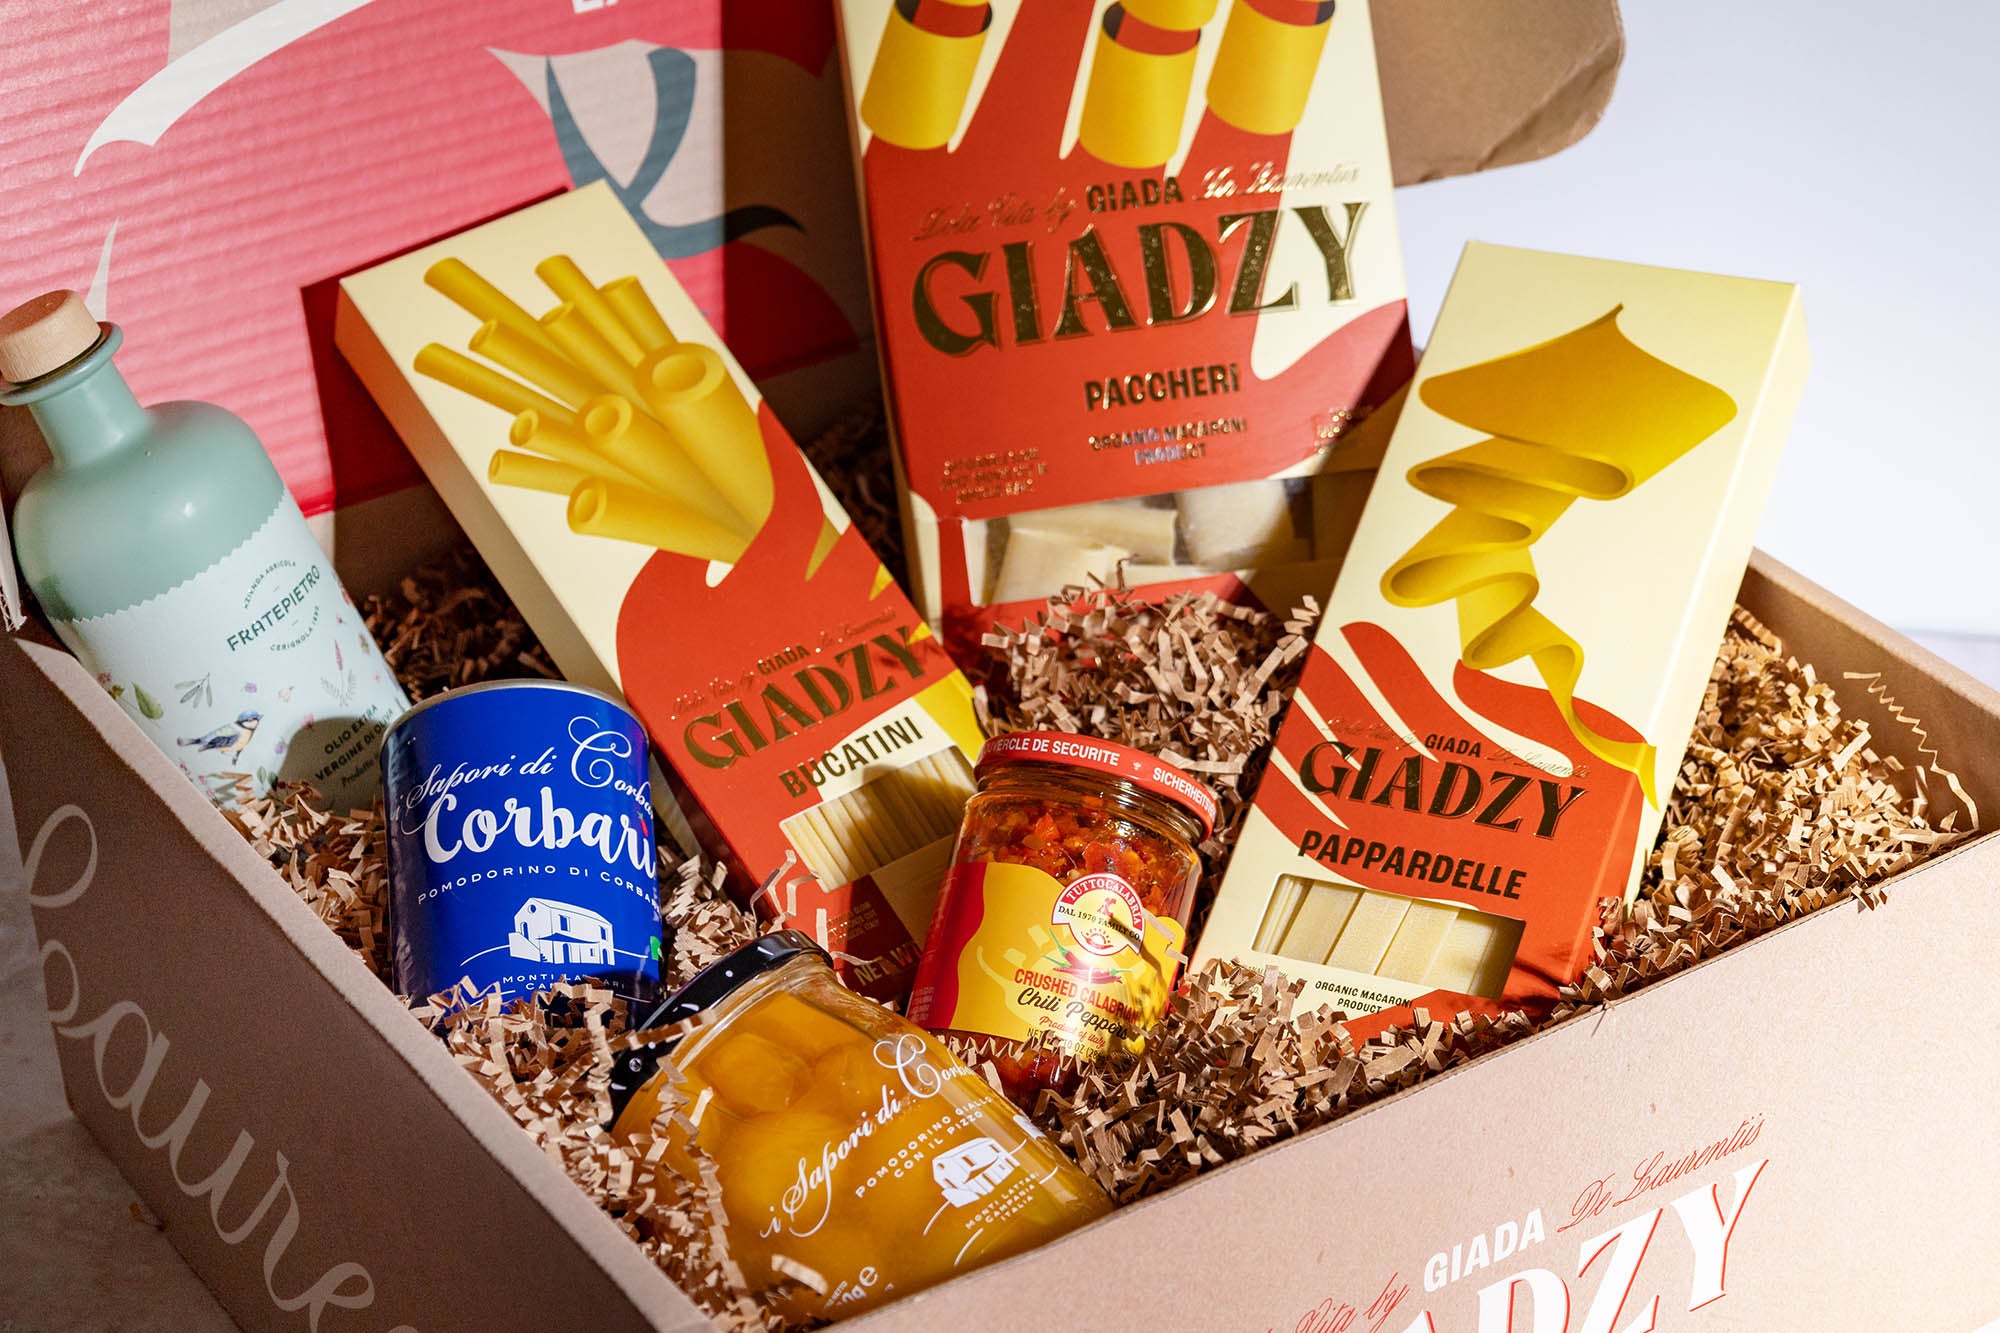 Corporate Gifting at Giadzy